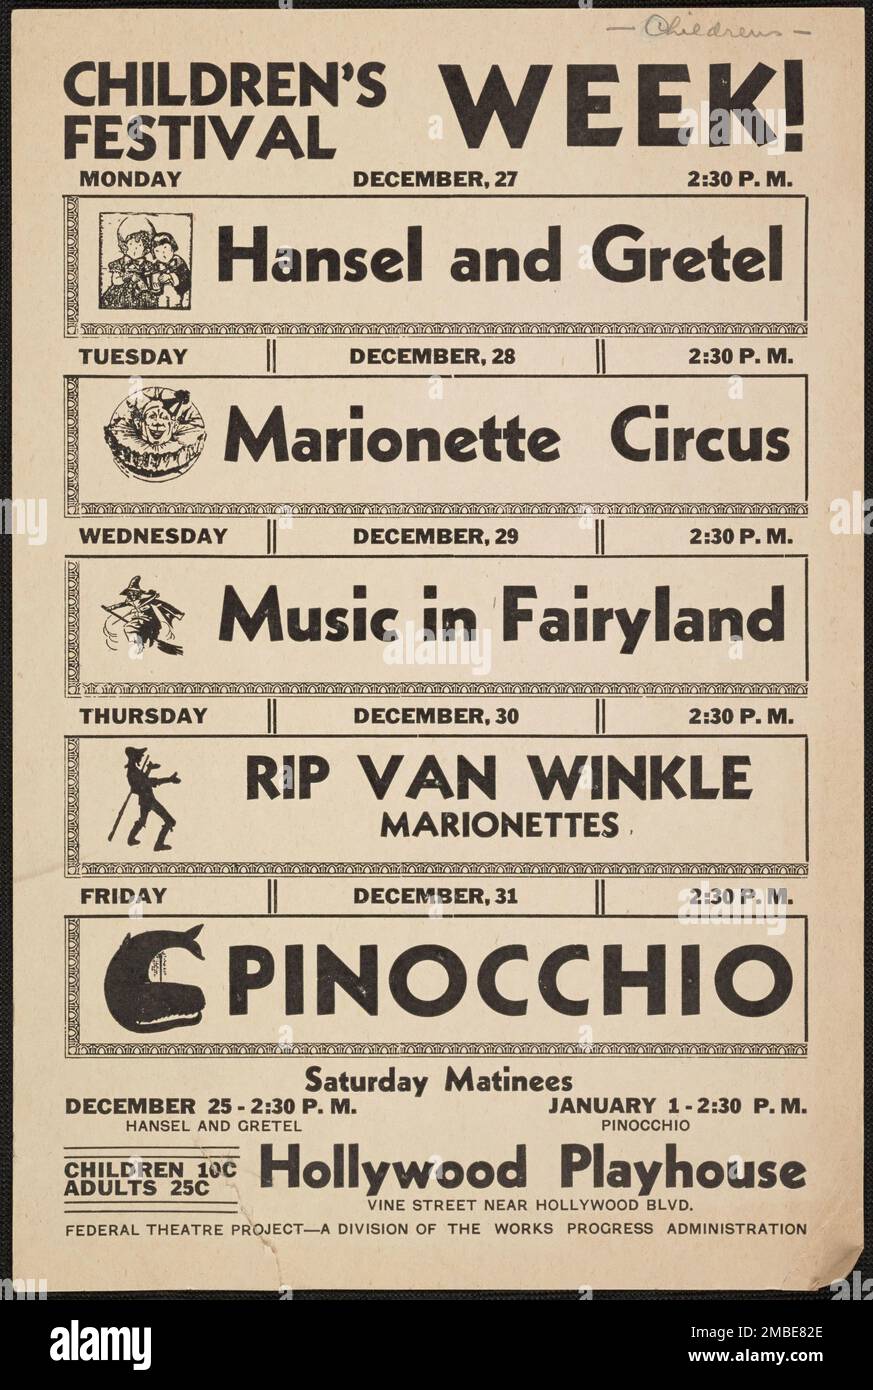 Children's Festival, Week! Los Angeles, 1937. 'Hansel and Gretel; Marionette Circus; Music in Fairyland, Rip van Winkle marionettes; Pinocchio...Saturday Matinees - Hollywood Playhouse, Vine Street near Hollywood Bouldvard...Federal Theatre Project - a Division of the Works Progress Administration'. The Federal Theatre Project, created by the U.S. Works Progress Administration in 1935, was designed to conserve and develop the skills of theater workers, re-employ them on public relief, and to bring theater to thousands in the United States who had never before seen live theatrical performances. Stock Photo